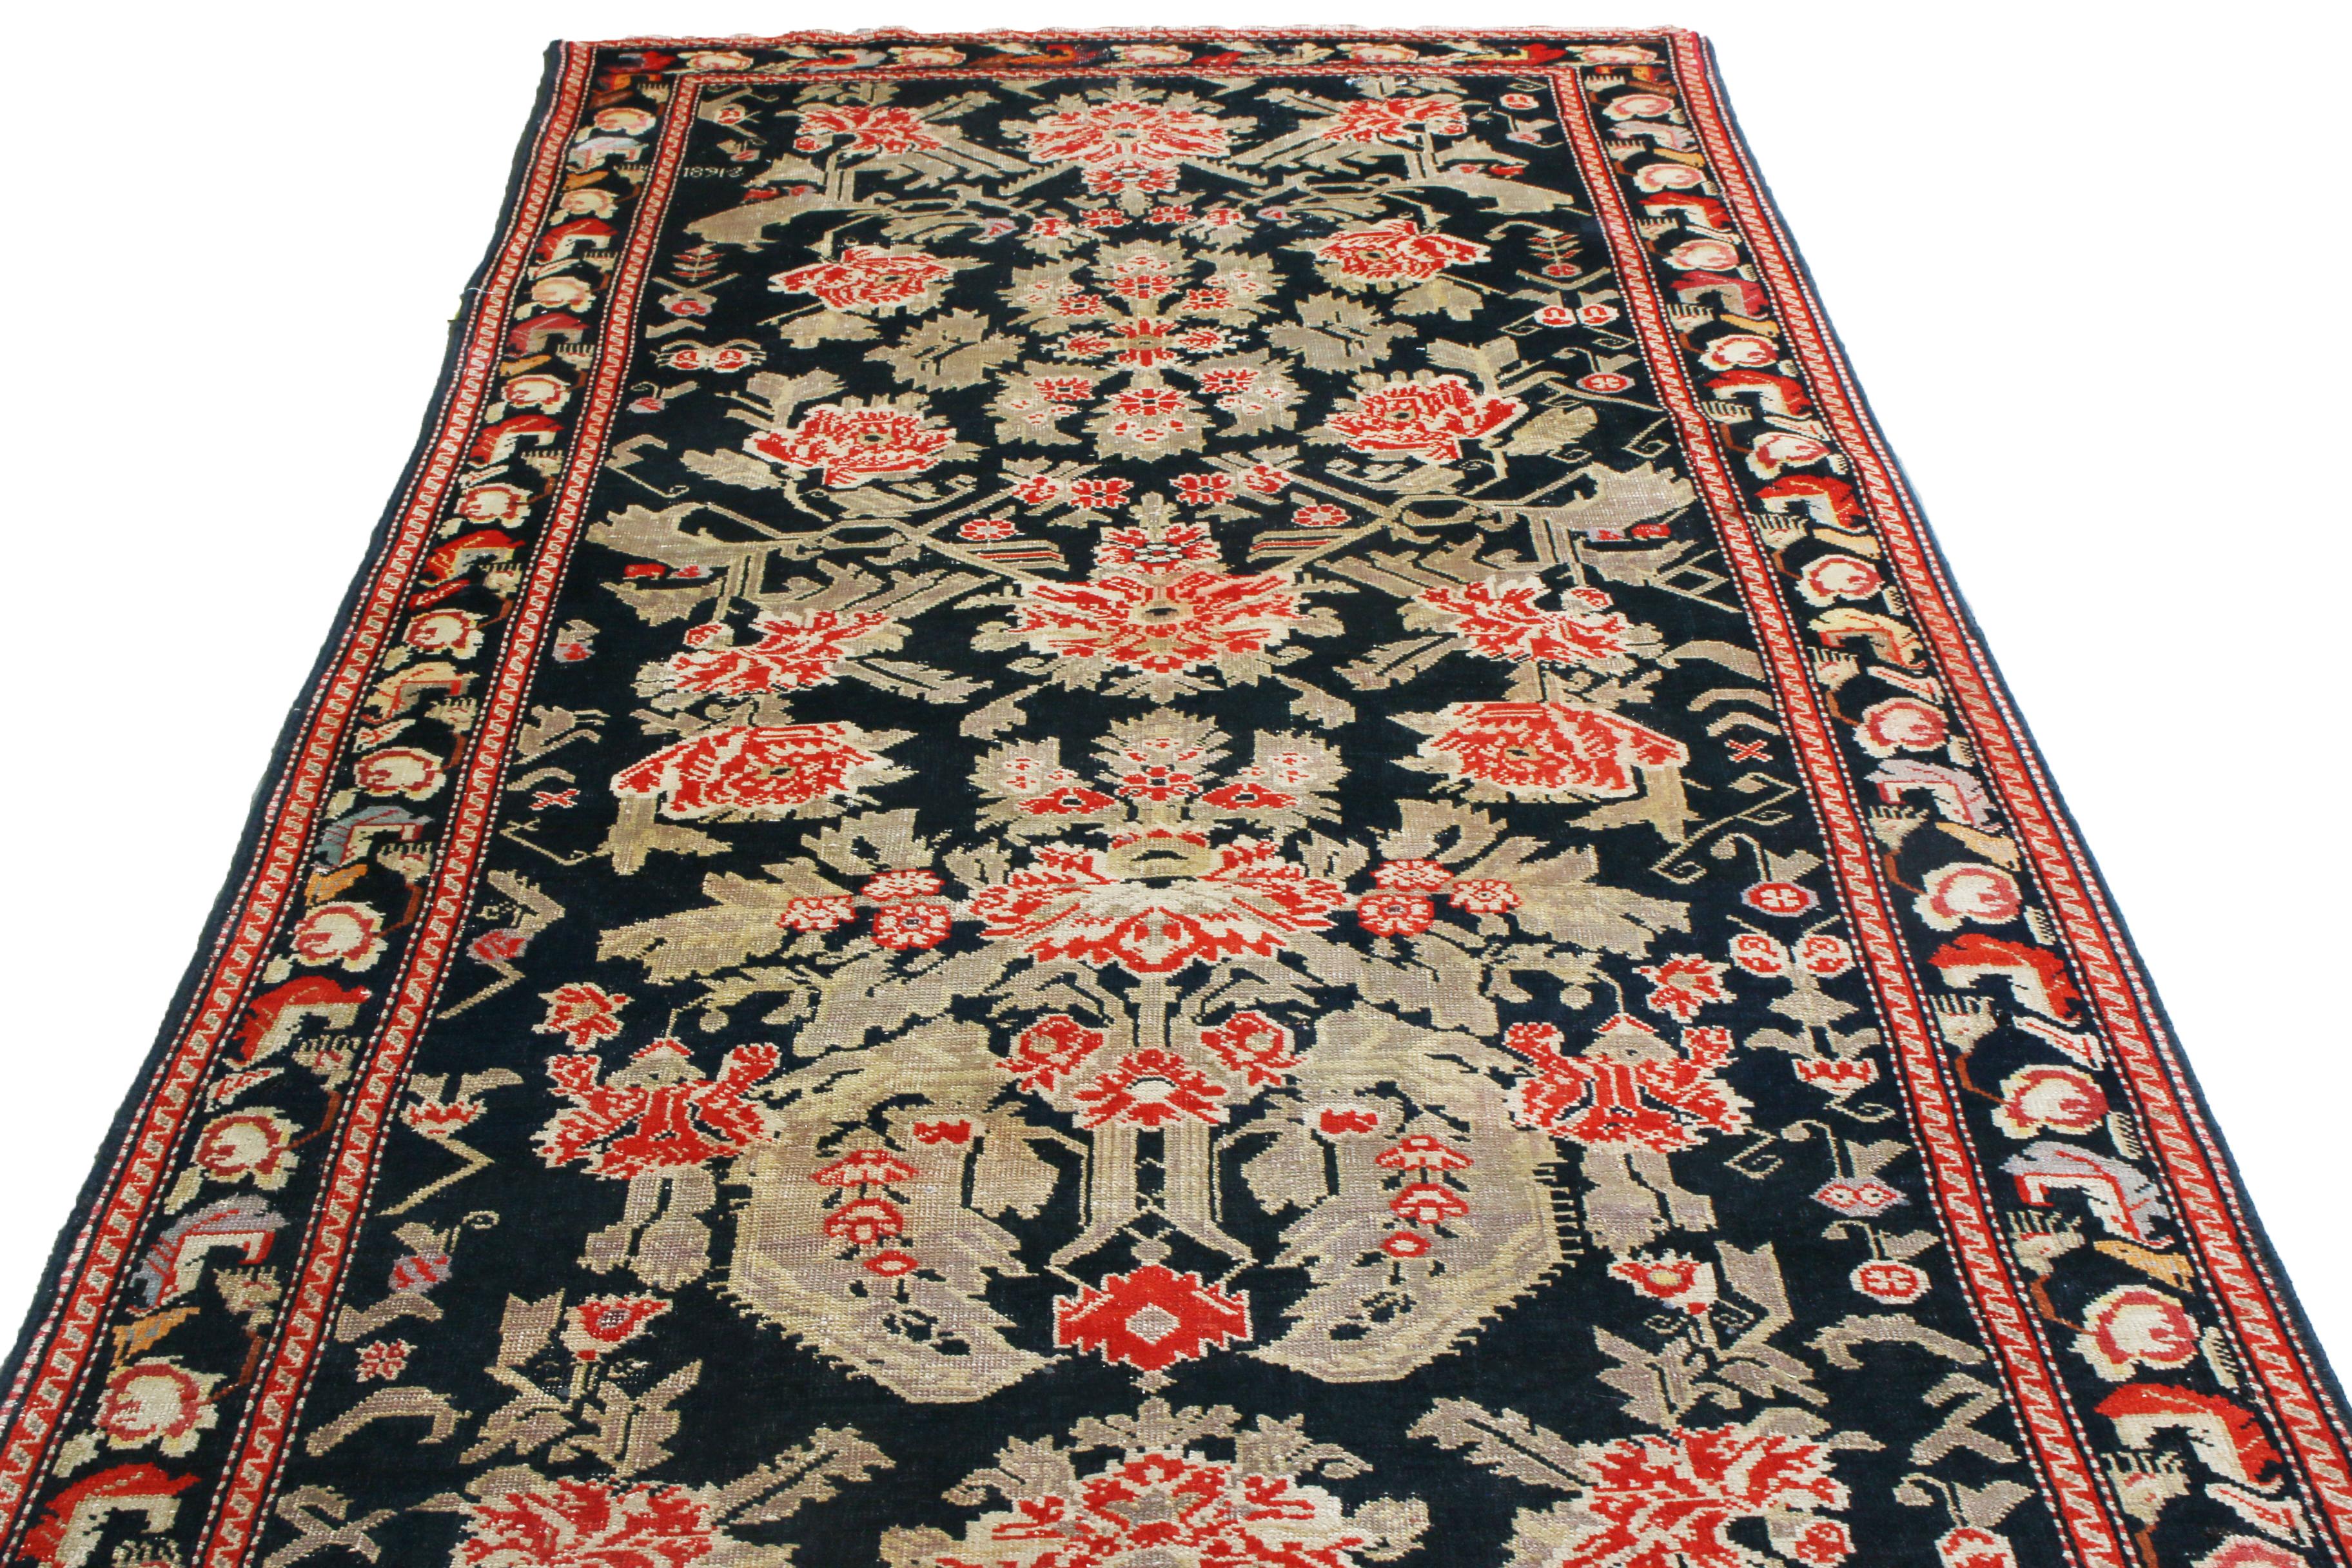 Hand-Knotted Antique Karabagh Black and Red Wool Floral Runner